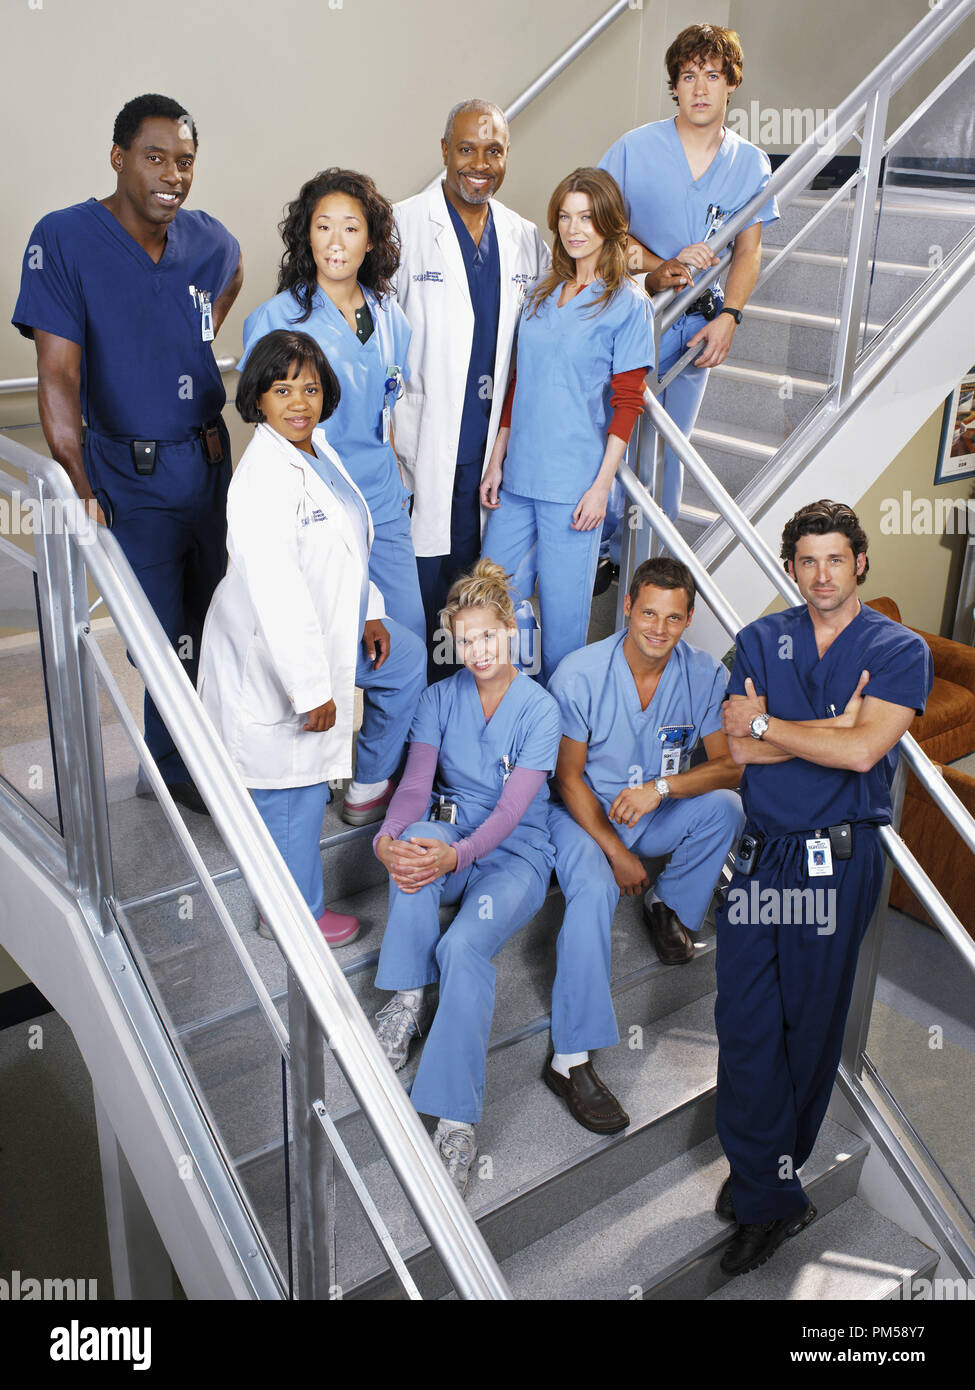 Studio Publicity Still from 'Grey's Anatomy' Isaiah Washington, Chandra Wilson, Sandra Oh, James Pickens Jr., Ellen Pompeo, T.R. Knight, Katherine Heigl, Justin Chambers, Patrick Dempsey 2005 Photo by Frank Ockenfels   File Reference # 307362002THA  For Editorial Use Only -  All Rights Reserved Stock Photo